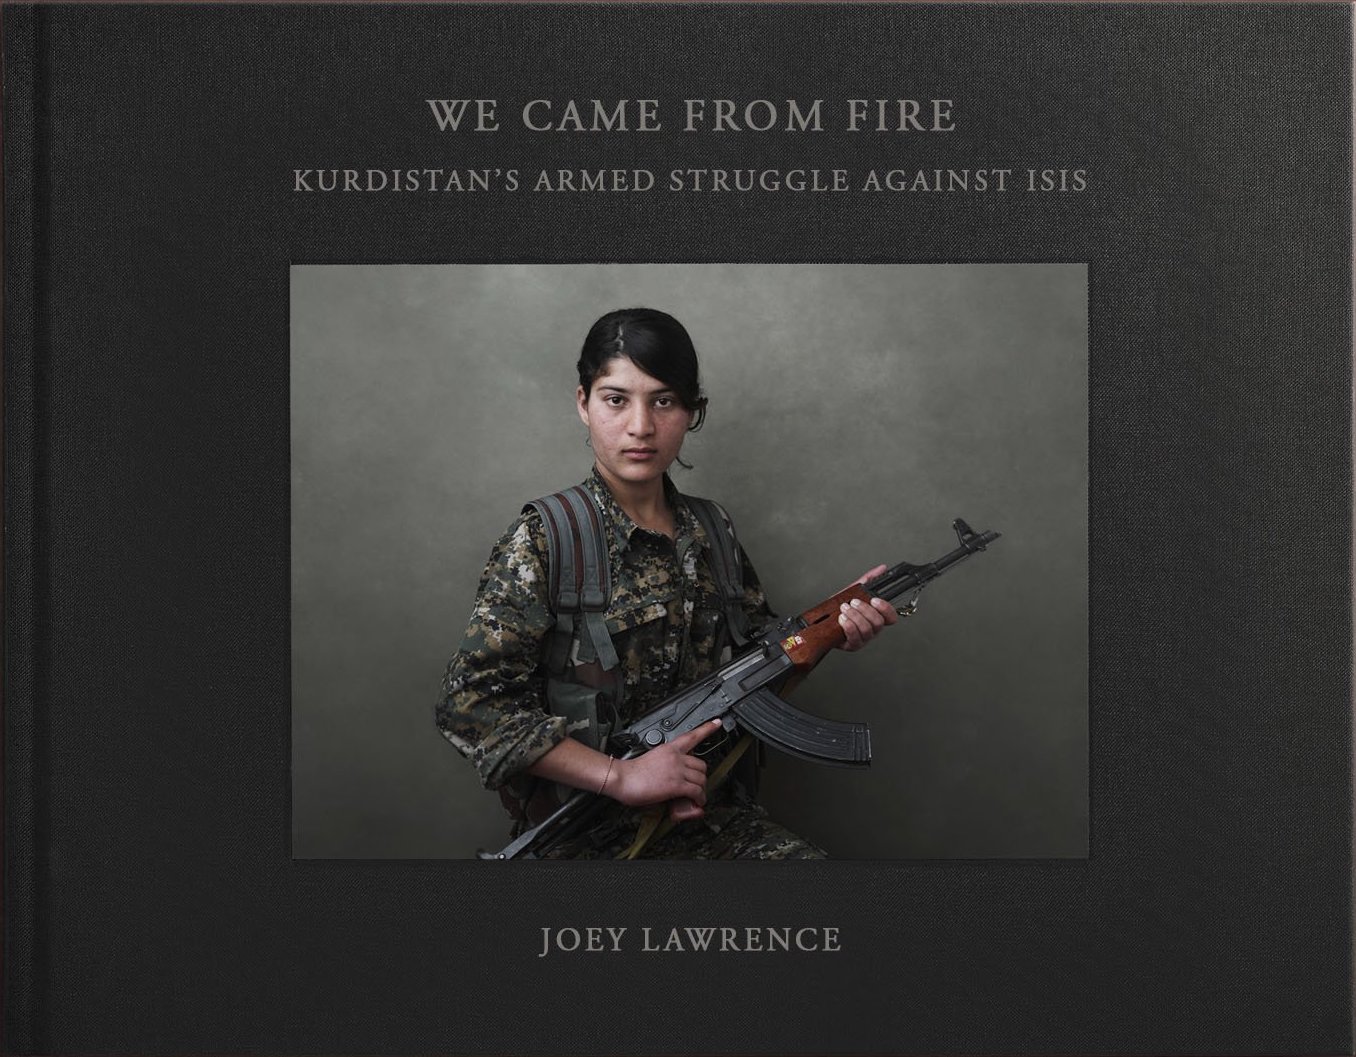 Cover of Joey Lawrence's "We came from fire" (published by powerHouse)